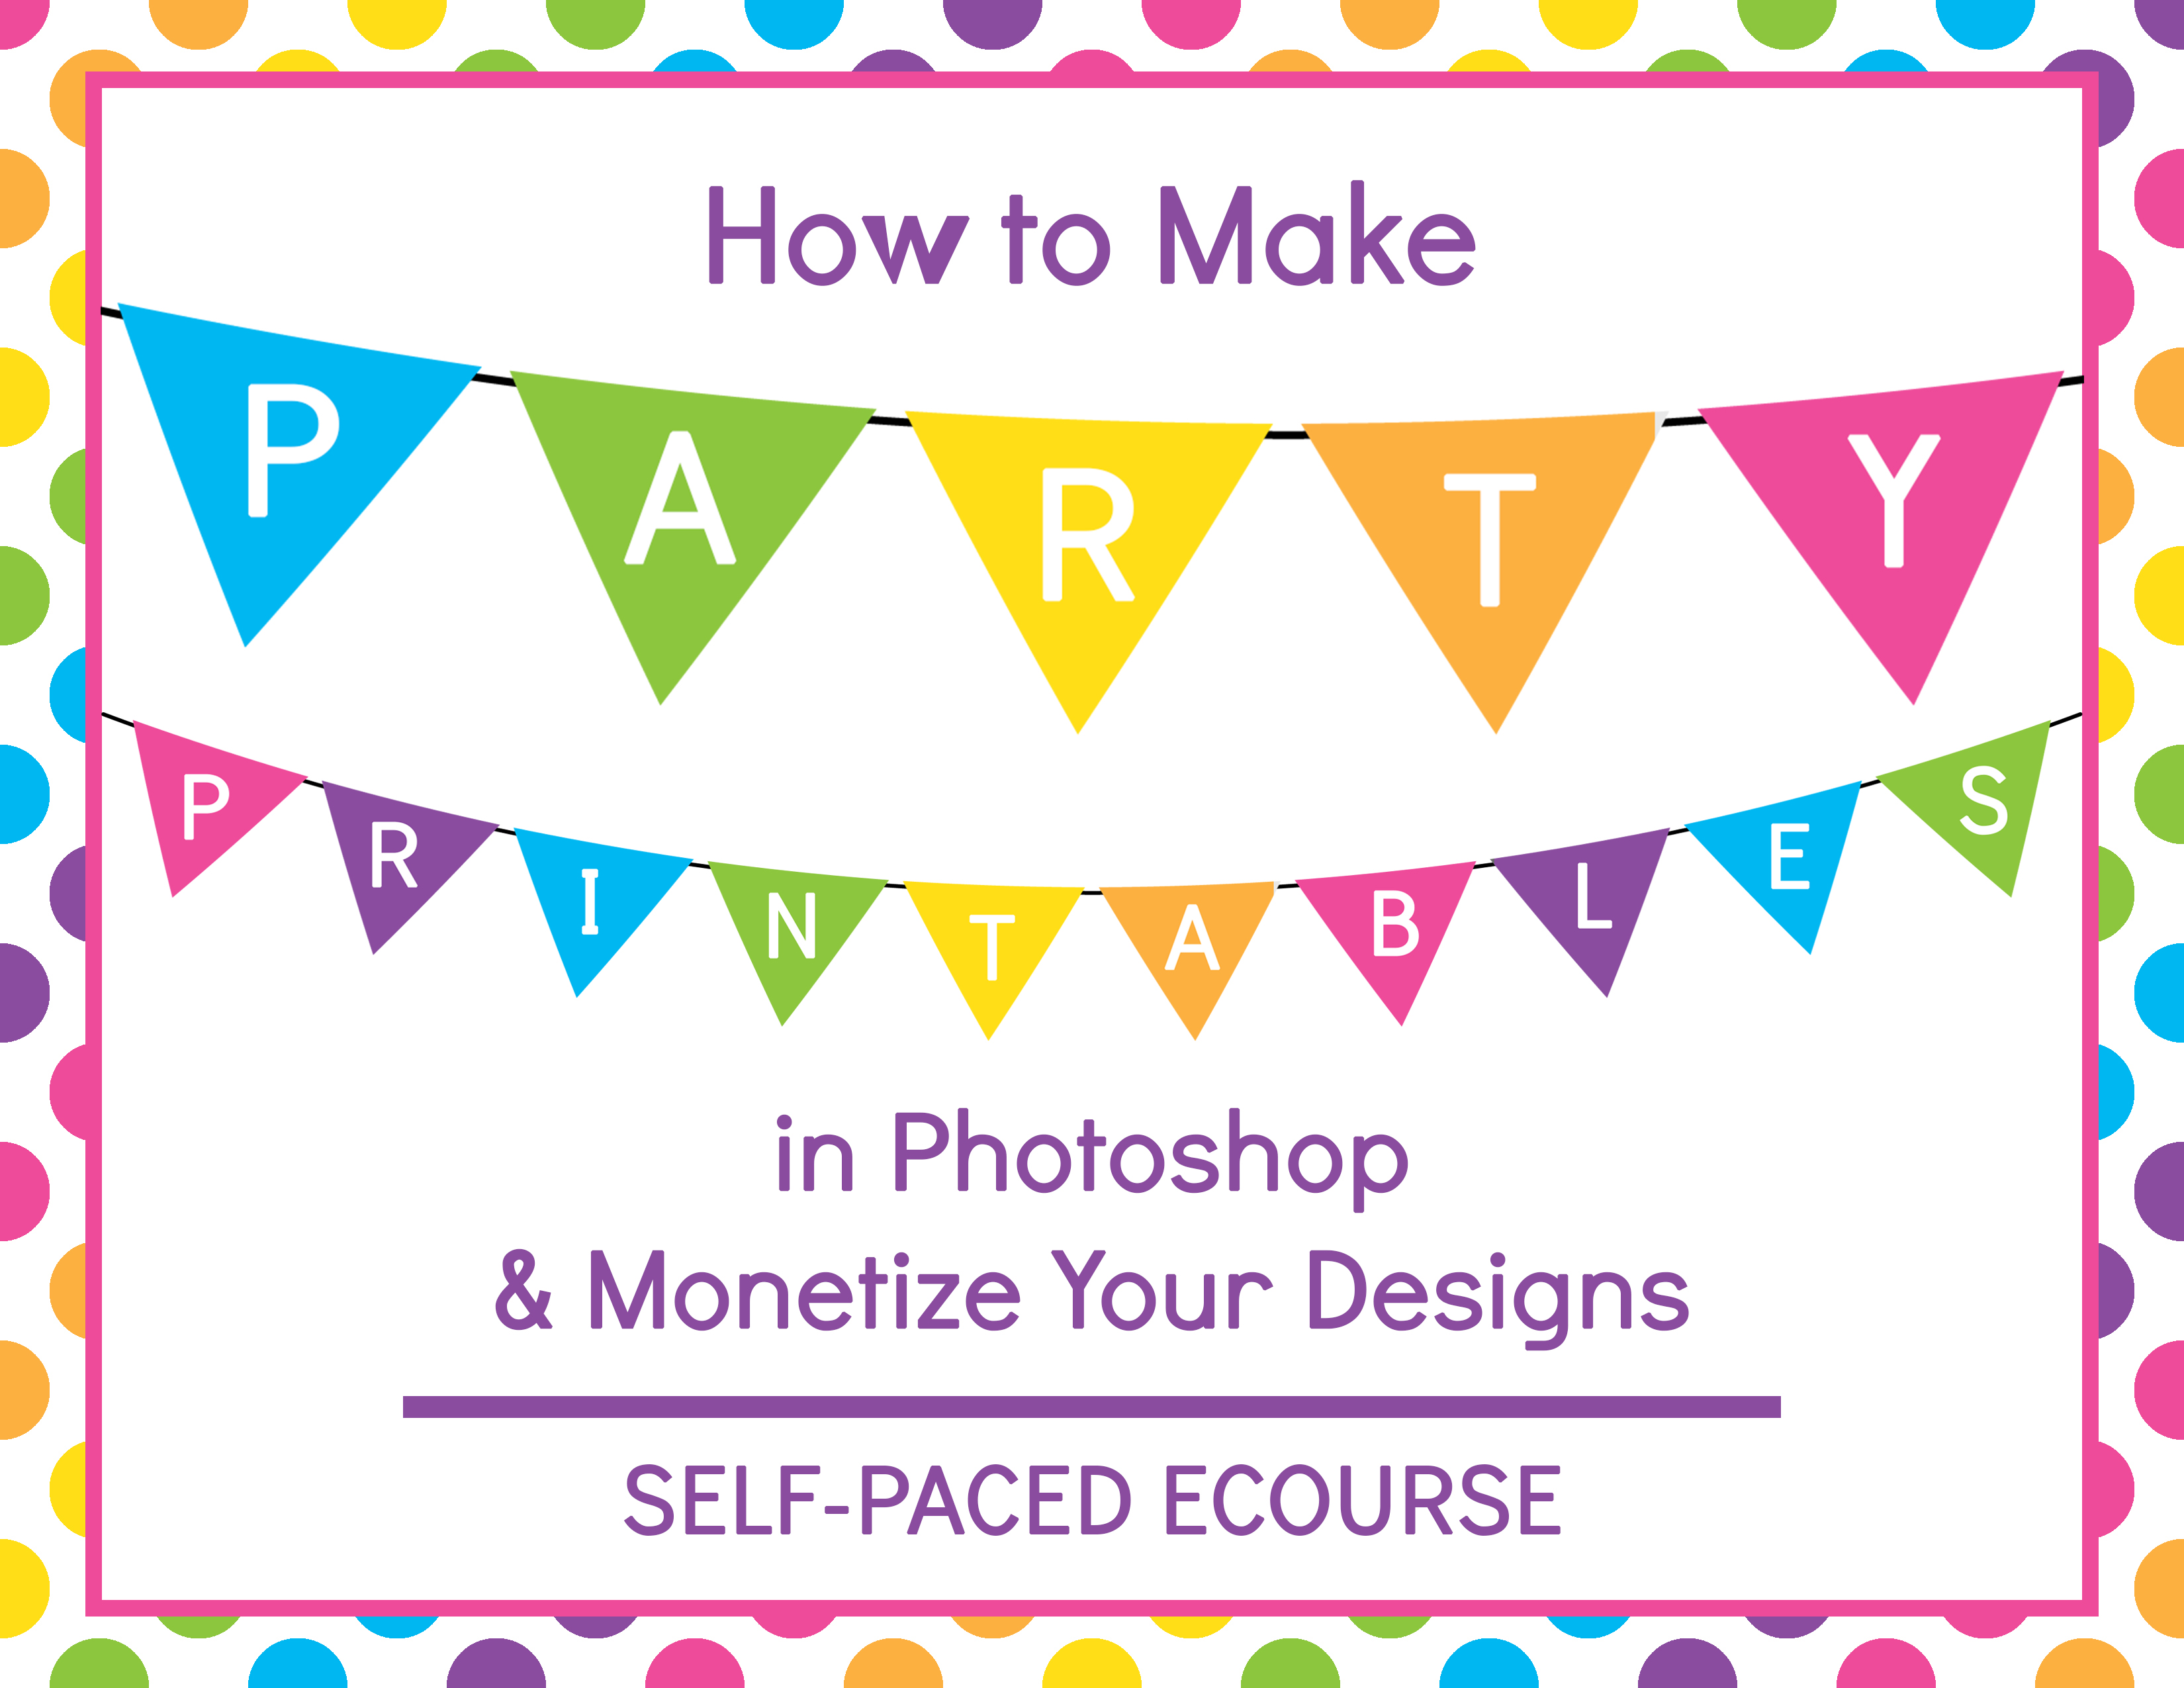 How to Make Party Printables in Photoshop and Monetize Your Designs, how to make printables, video tutorial, ecourse, how to start a printables business, how to make a party banner, how to make cupcake toppers, how to make bunting, candy wrapper, printable, diy, flag, hershey's kiss sticker, water bottle label, how to make stickers, how to make invitations, party invitation, custom party invitation